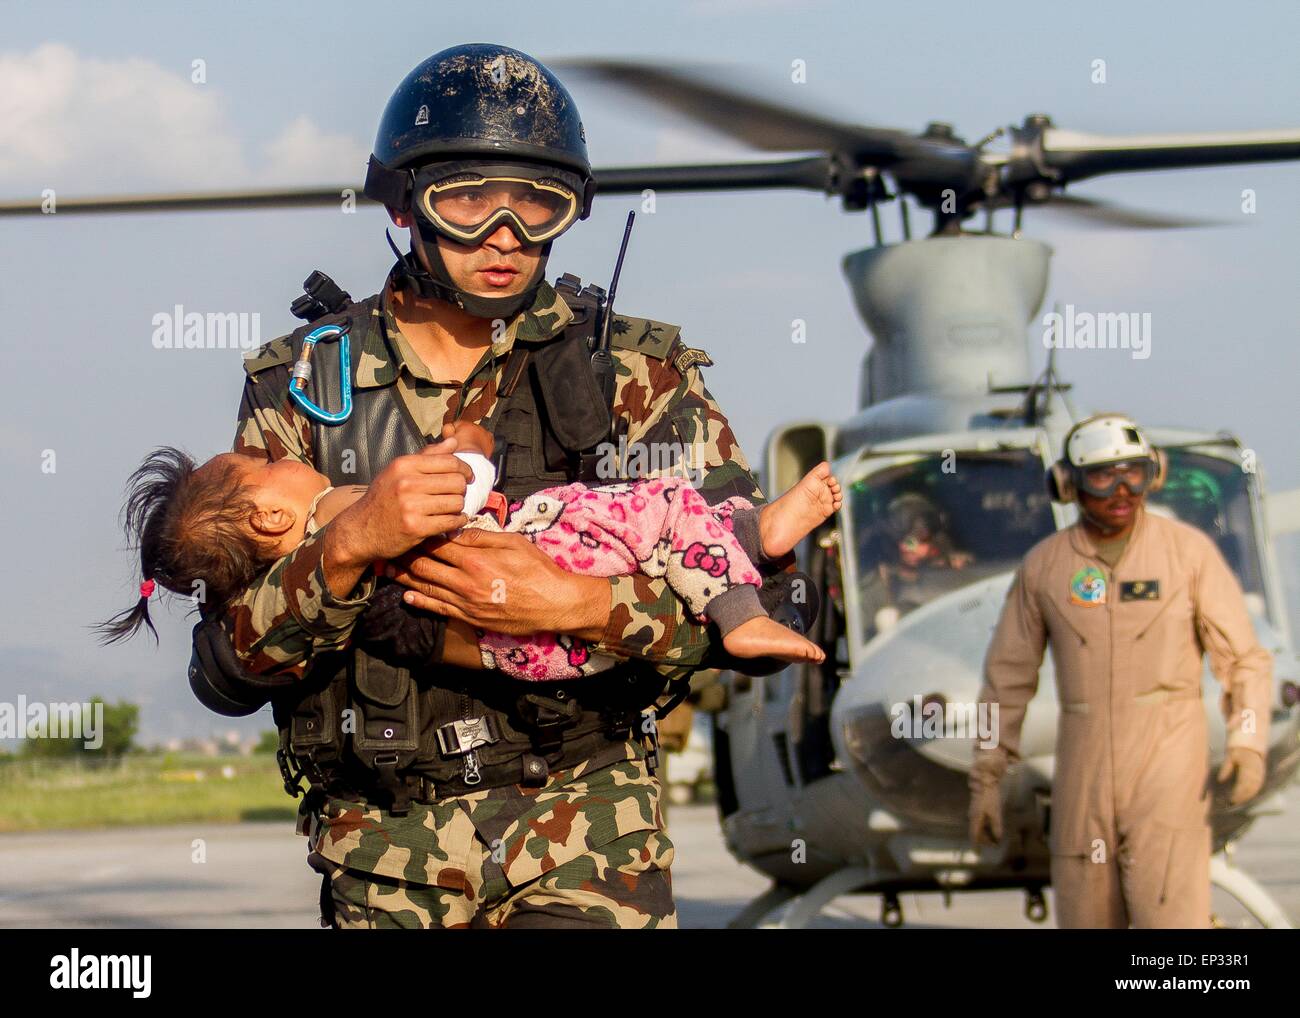 Kathmandu, Nepal. 13th May, 2015. A Nepalese soldier carries a young earthquake victim from a U.S Marine Corps helicopter to a medical triage area setup at Tribhuvan International Airport May 12, 2015 in Kathmandu, Nepal. A 7.3 magnitude aftershock earthquake struck the kingdom following the 7.8 magnitude earthquake on April 25th. Stock Photo